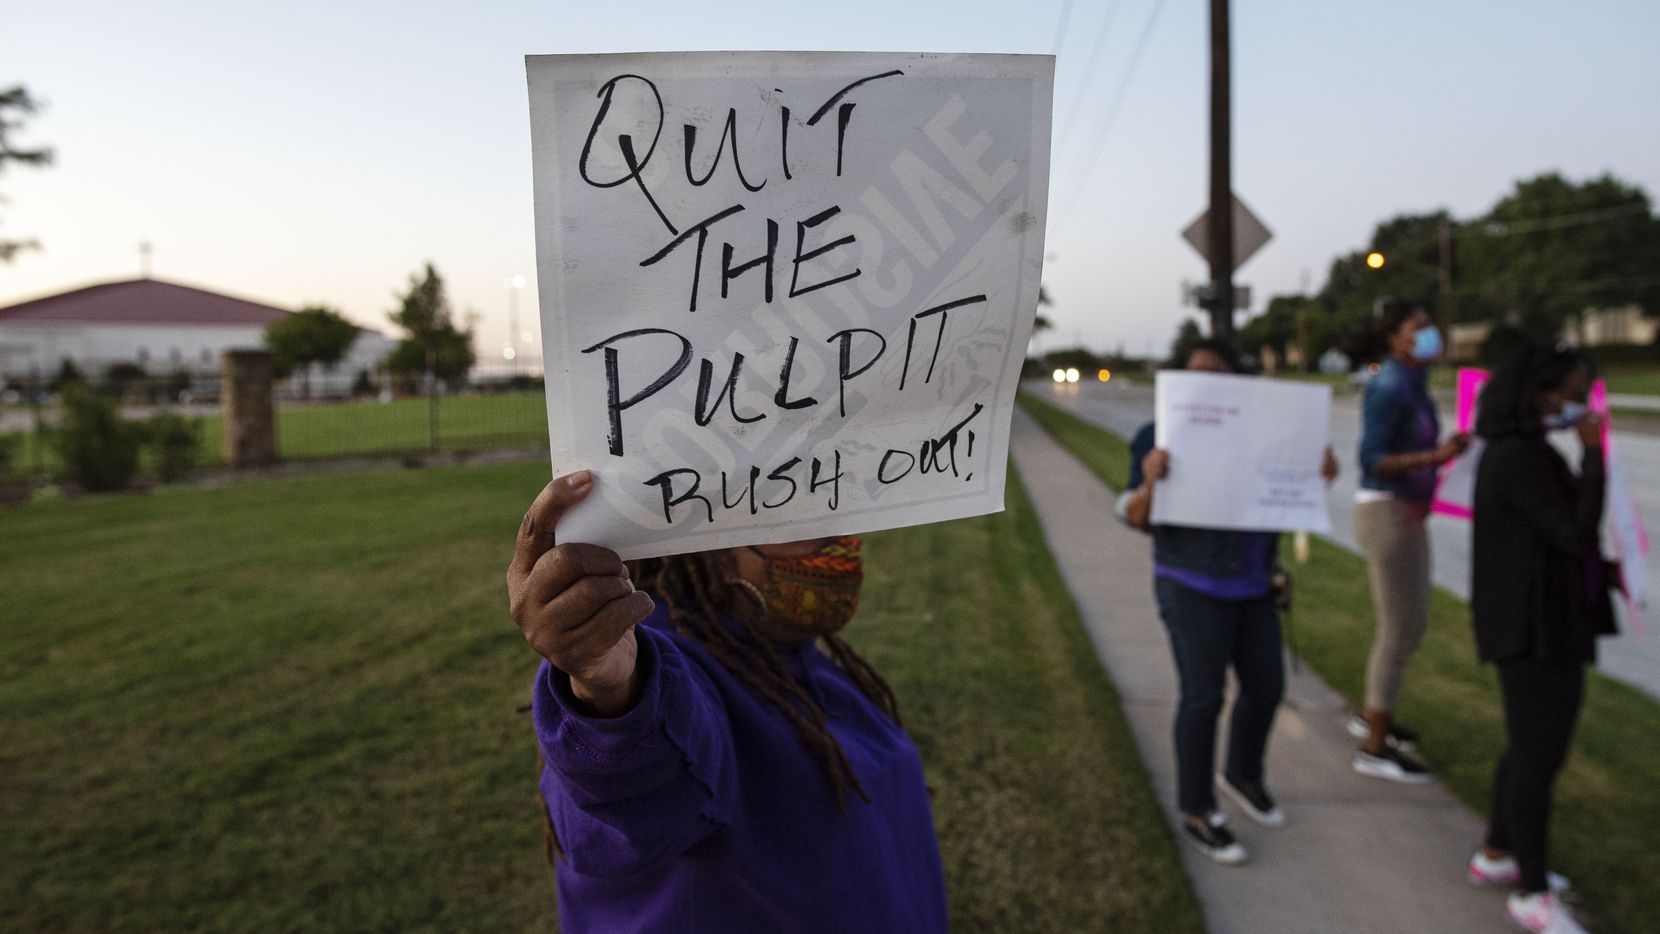 Women's advocate Diane White, center, holds a sign calling for Rickie Rush to step down as Pastor of The Inspiring Body of Christ Church in Dallas.  She and other advocates demonstrated outside the church Monday evening.